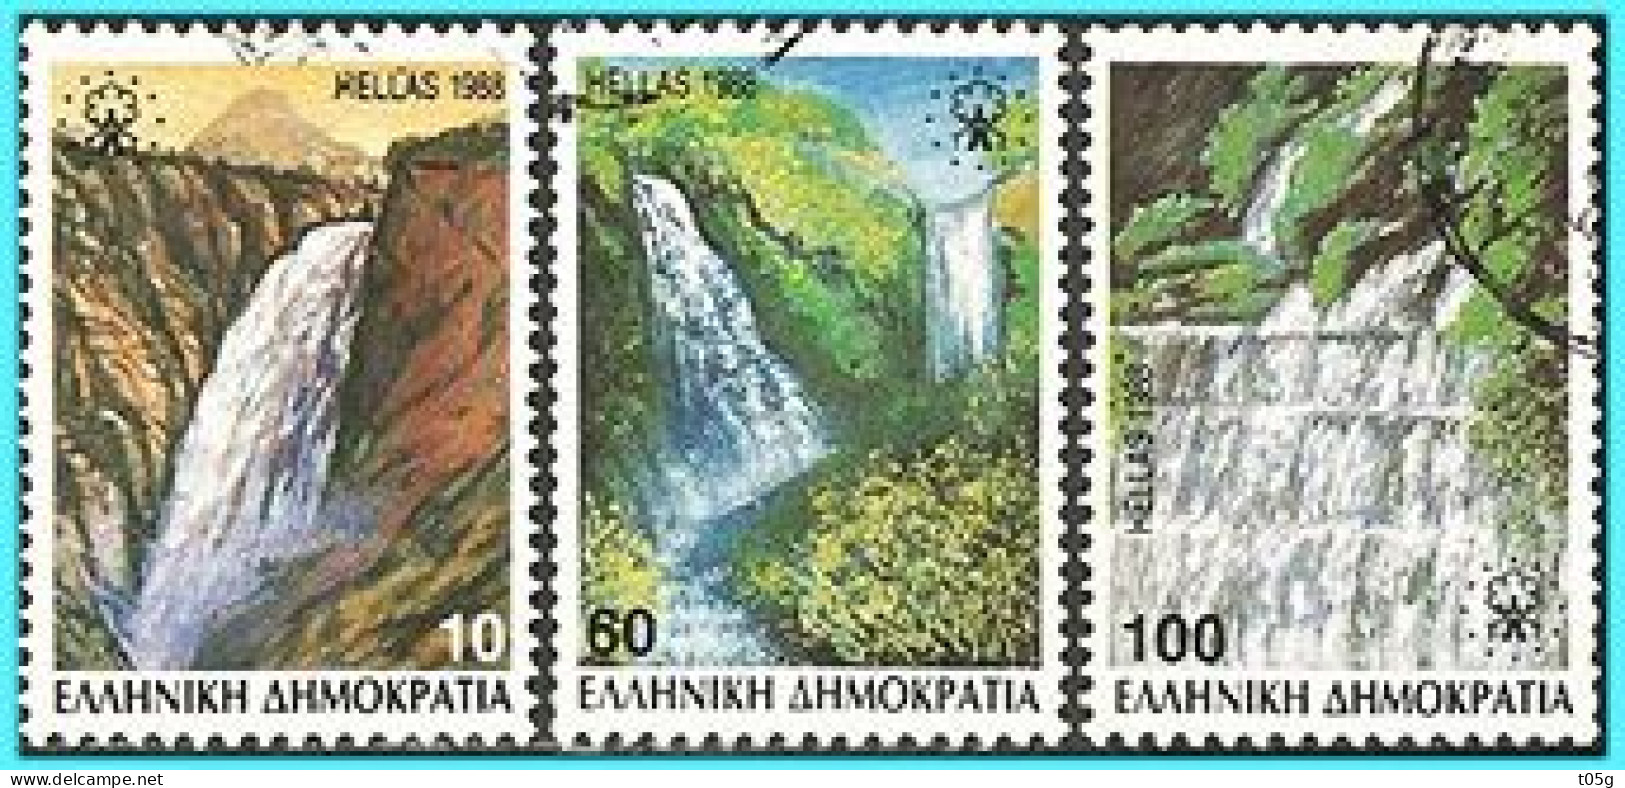 GREECE- GRECE- HELLAS 1988: Compl. Set Used - Used Stamps